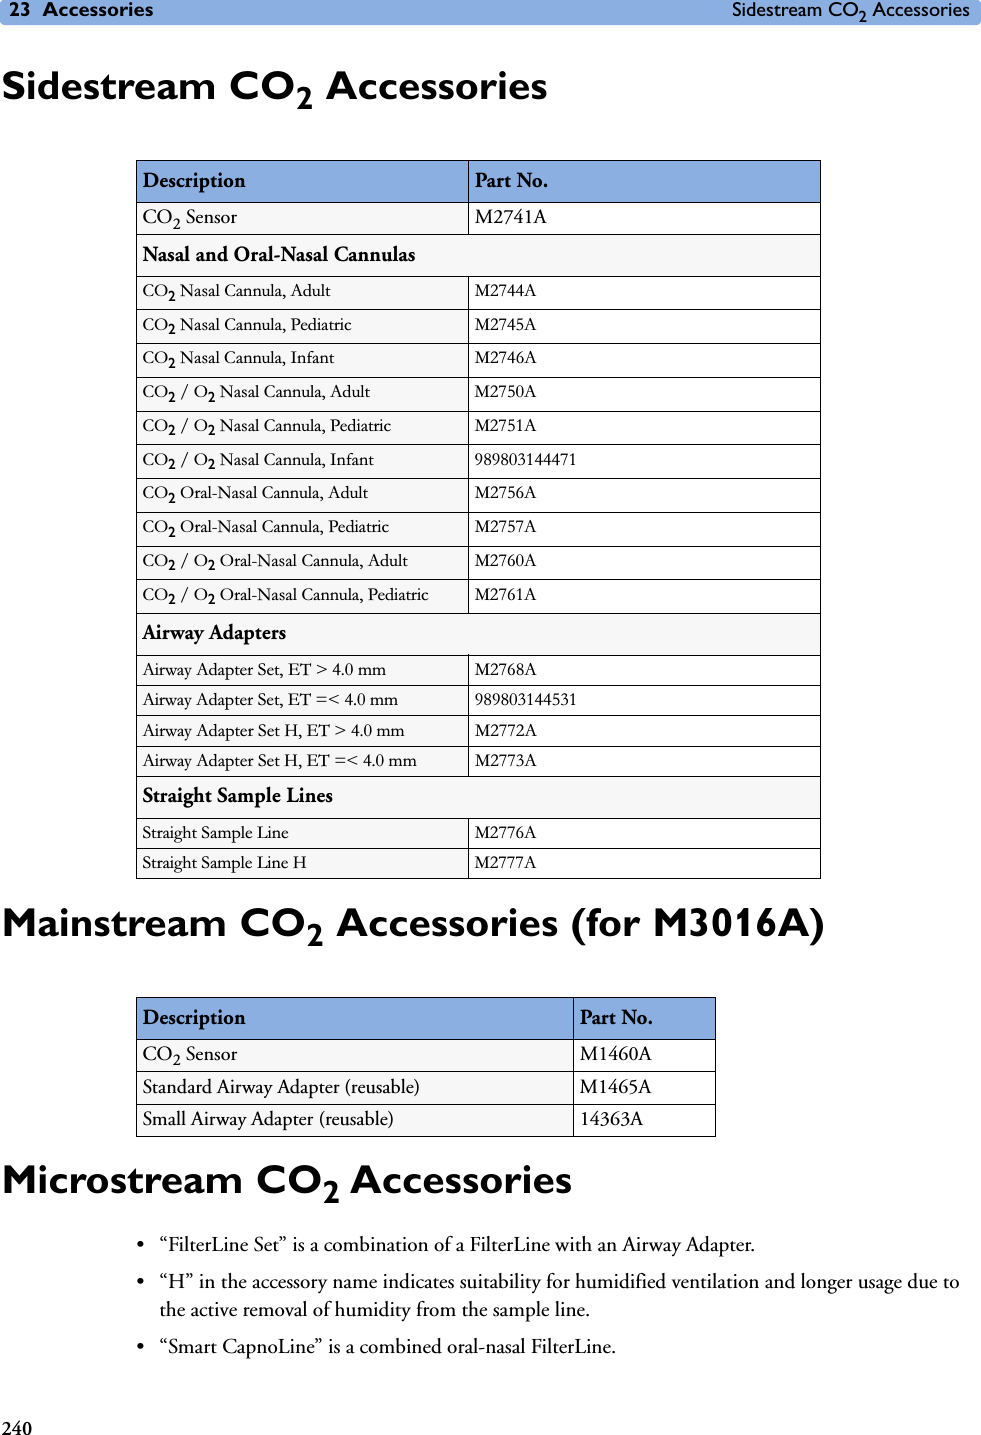 23 Accessories Sidestream CO2 Accessories240Sidestream CO2 AccessoriesMainstream CO2 Accessories (for M3016A)Microstream CO2 Accessories• “FilterLine Set” is a combination of a FilterLine with an Airway Adapter. • “H” in the accessory name indicates suitability for humidified ventilation and longer usage due to the active removal of humidity from the sample line.• “Smart CapnoLine” is a combined oral-nasal FilterLine. Description Part No. CO2 Sensor M2741ANasal and Oral-Nasal CannulasCO2 Nasal Cannula, Adult M2744ACO2 Nasal Cannula, Pediatric M2745ACO2 Nasal Cannula, Infant M2746ACO2 / O2 Nasal Cannula, Adult M2750ACO2 / O2 Nasal Cannula, Pediatric M2751ACO2 / O2 Nasal Cannula, Infant 989803144471CO2 Oral-Nasal Cannula, Adult M2756ACO2 Oral-Nasal Cannula, Pediatric M2757ACO2 / O2 Oral-Nasal Cannula, Adult M2760ACO2 / O2 Oral-Nasal Cannula, Pediatric M2761AAirway AdaptersAirway Adapter Set, ET &gt; 4.0 mm M2768AAirway Adapter Set, ET =&lt; 4.0 mm 989803144531Airway Adapter Set H, ET &gt; 4.0 mm M2772AAirway Adapter Set H, ET =&lt; 4.0 mm M2773AStraight Sample LinesStraight Sample Line M2776AStraight Sample Line H M2777ADescription Part No. CO2 Sensor M1460AStandard Airway Adapter (reusable) M1465ASmall Airway Adapter (reusable) 14363A